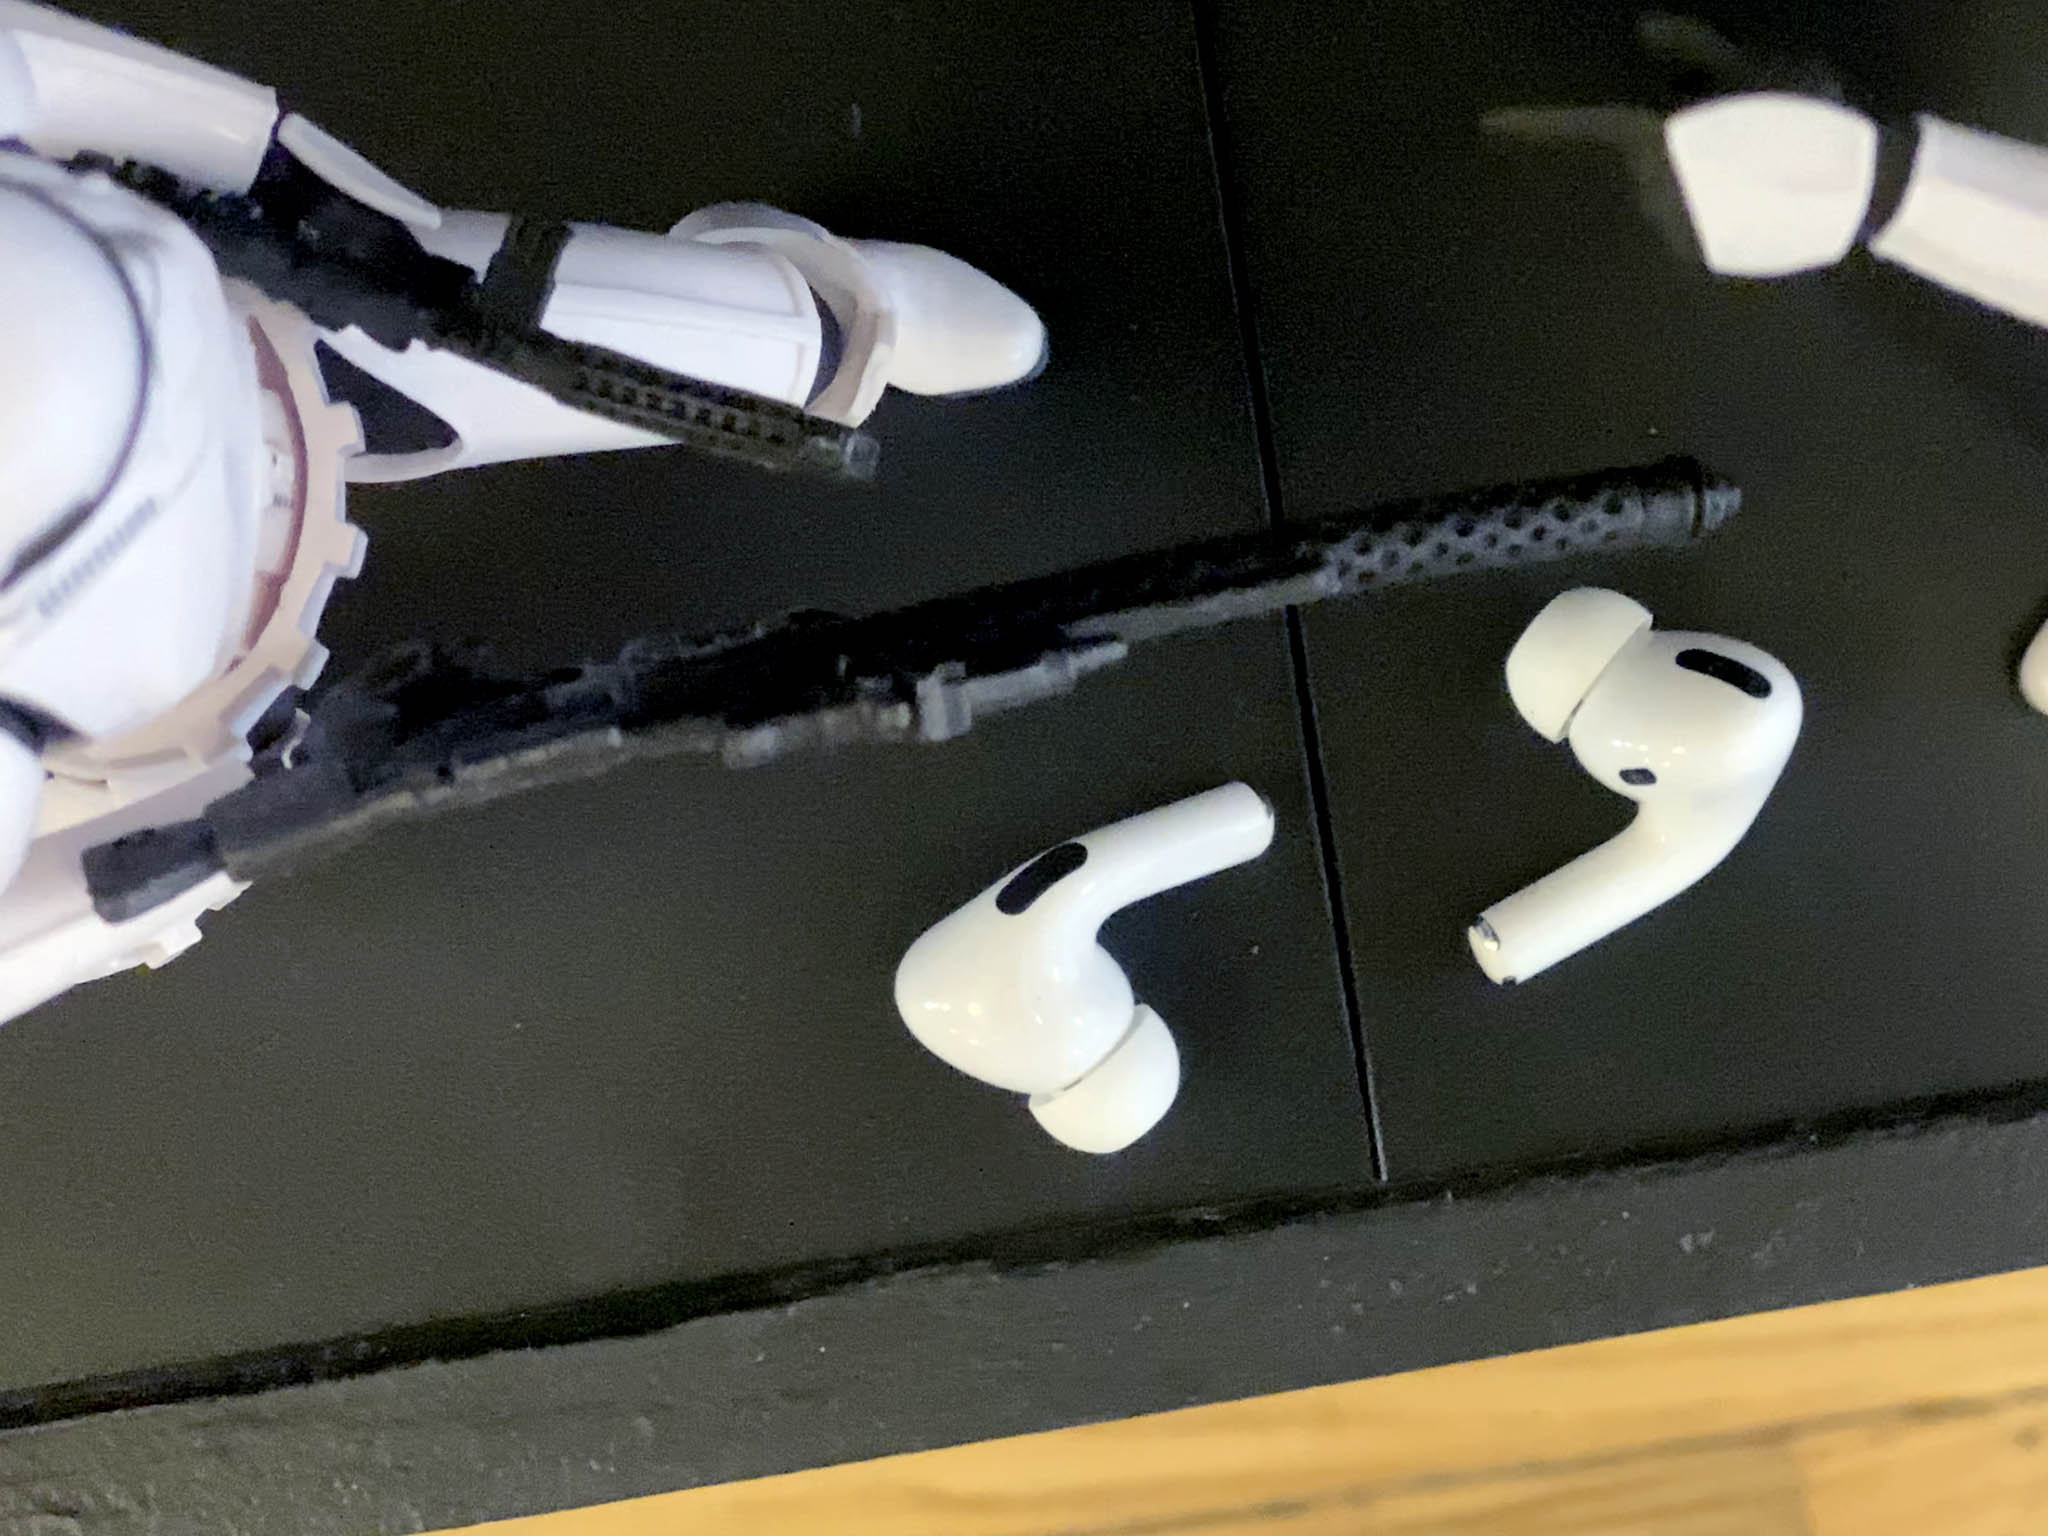 AirPods Pro look like Storm Troopers